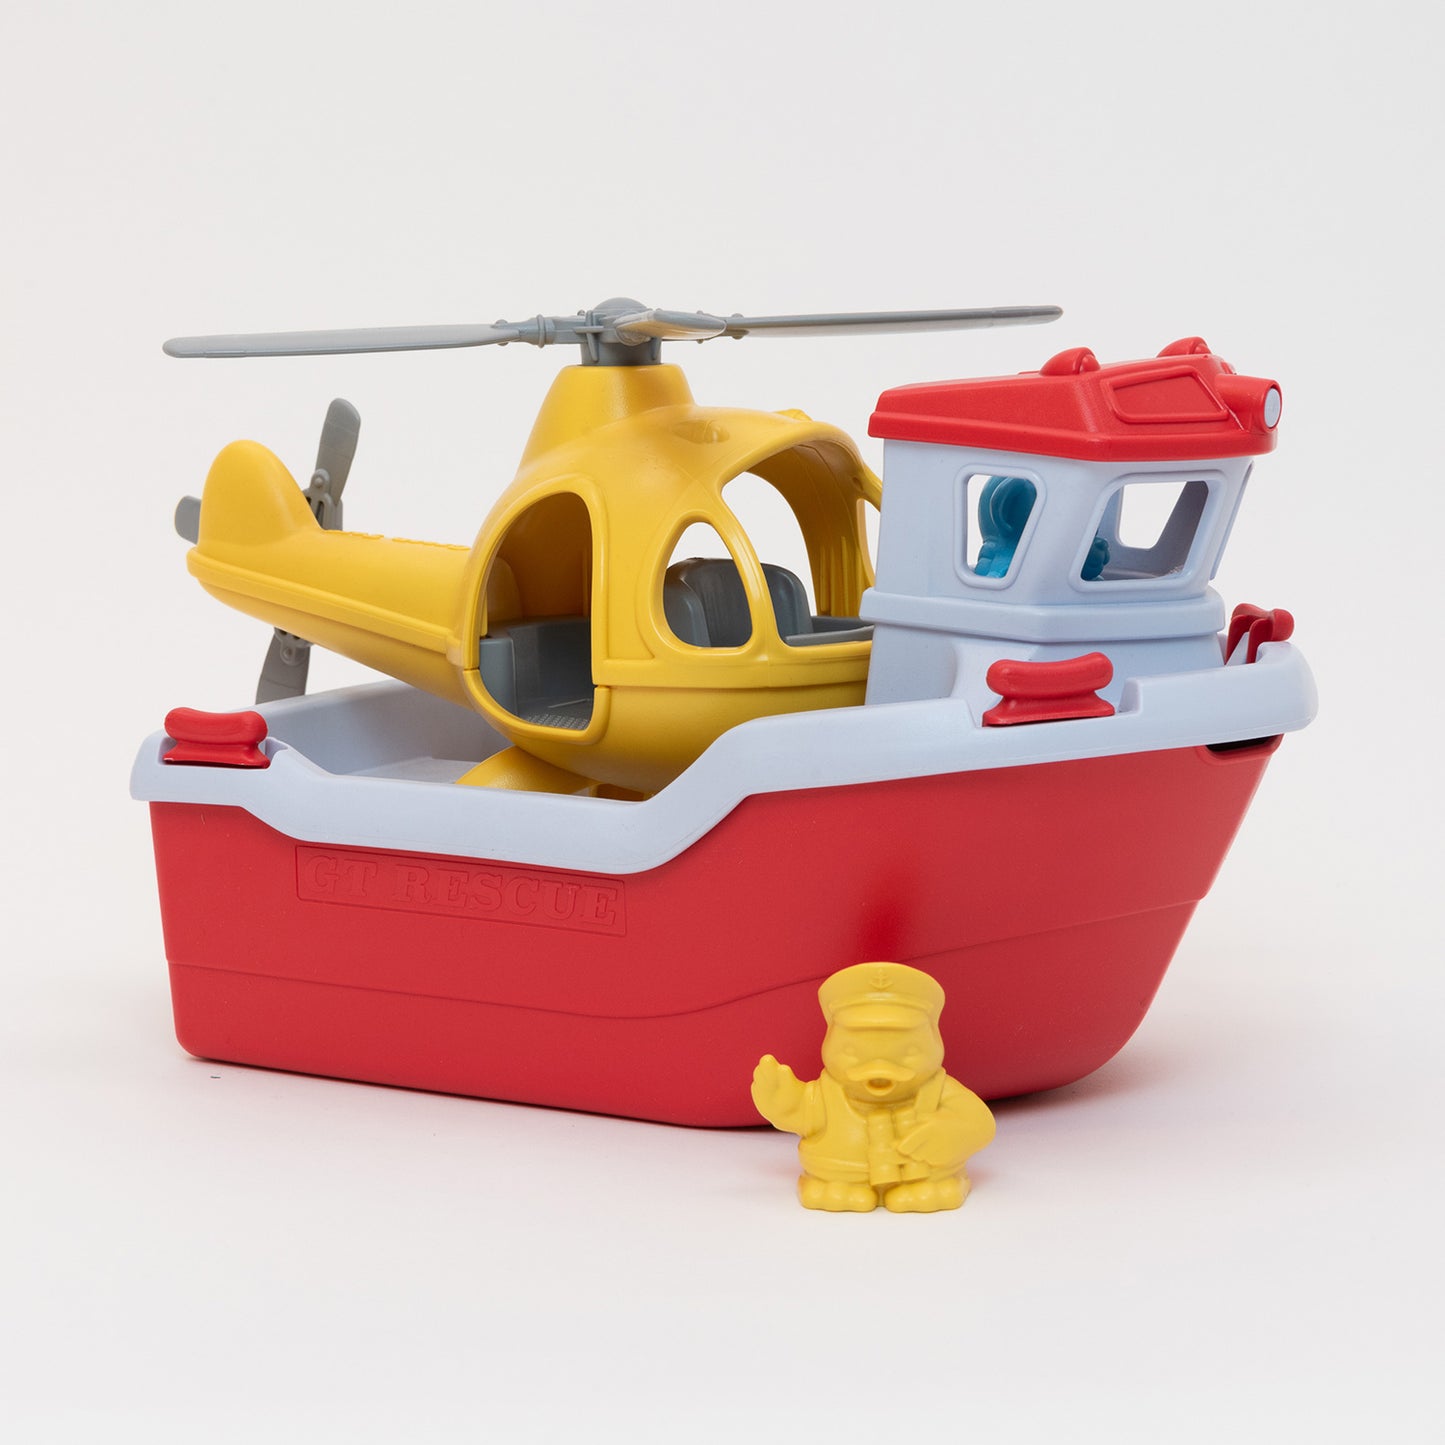 A red and white toy boat with a yellow helicopter on the deck and a small yellow toy penguin captain.